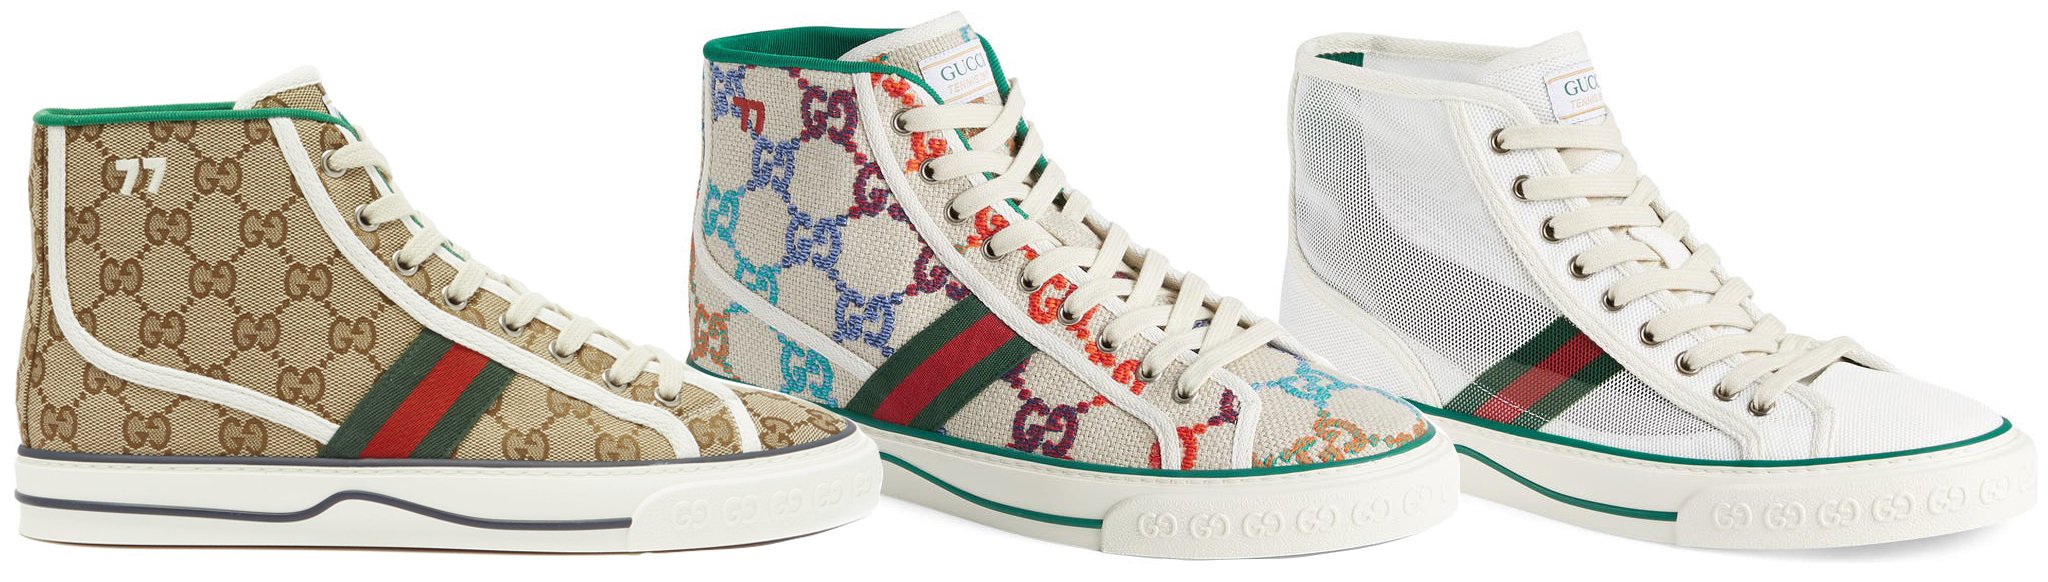 Gucci is one of the most iconic fashion brands in the world, and it's no surprise that their sneakers are just as popular